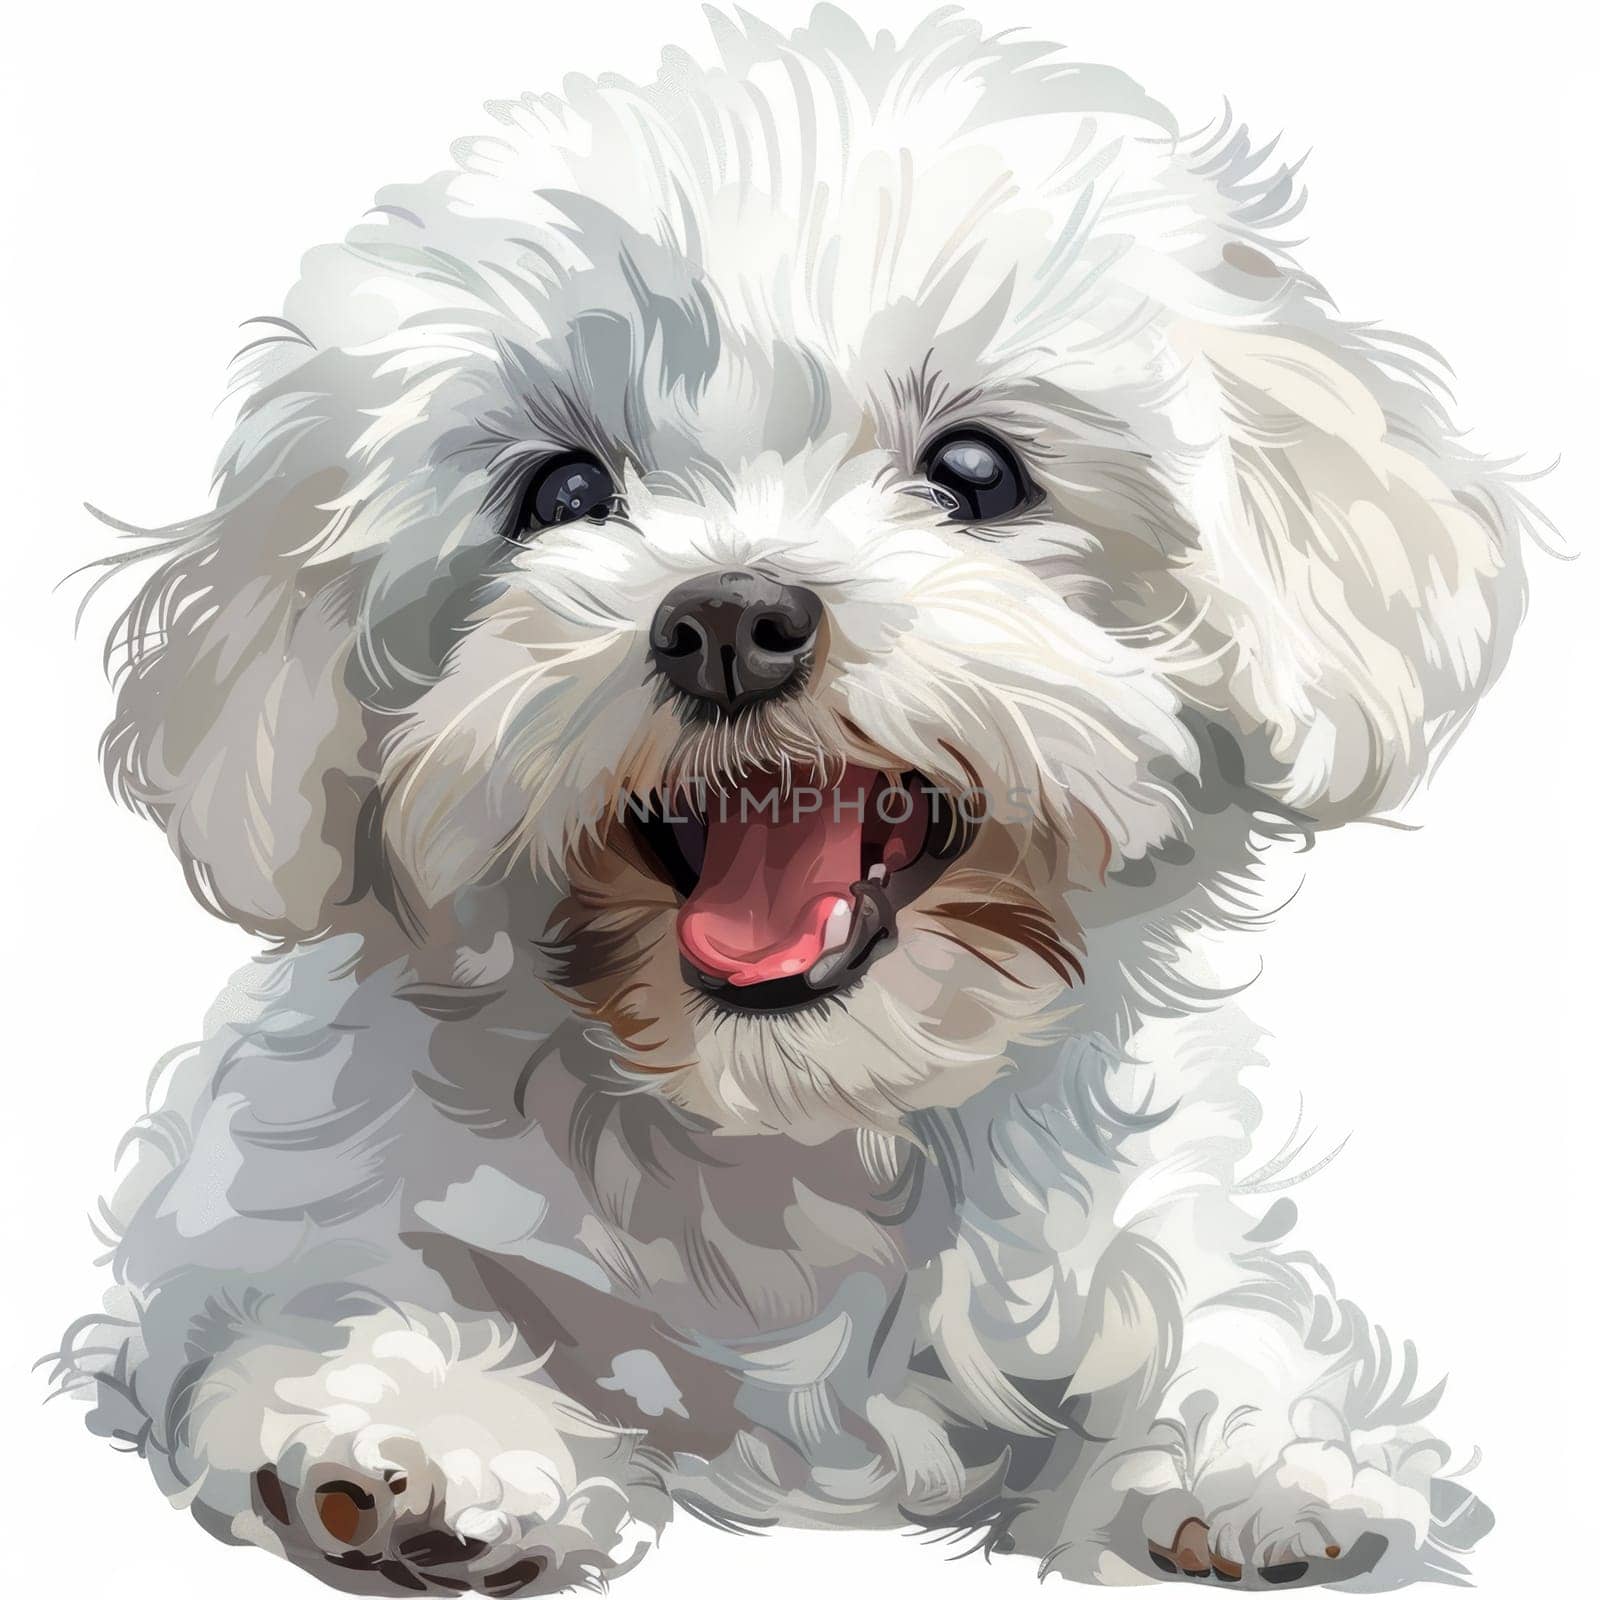 The Bichon Frise breed dog is isolated on a white background. Illustration by Lobachad